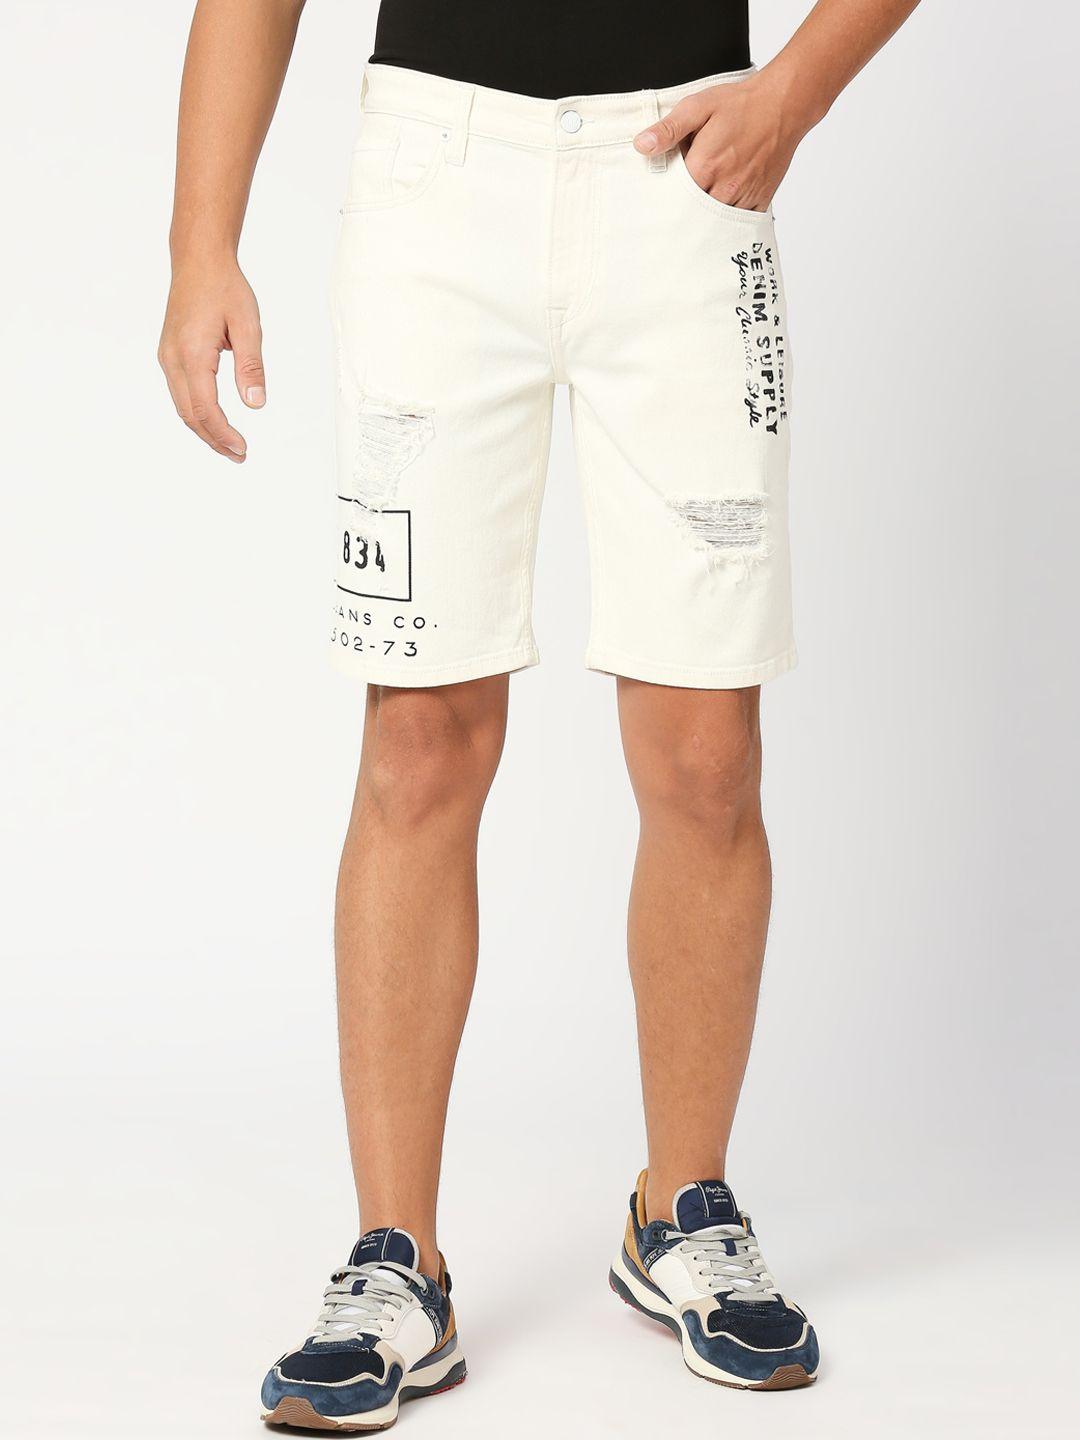 pepe-jeans-men-mid-rise-typography-printed-casual-denim-shorts